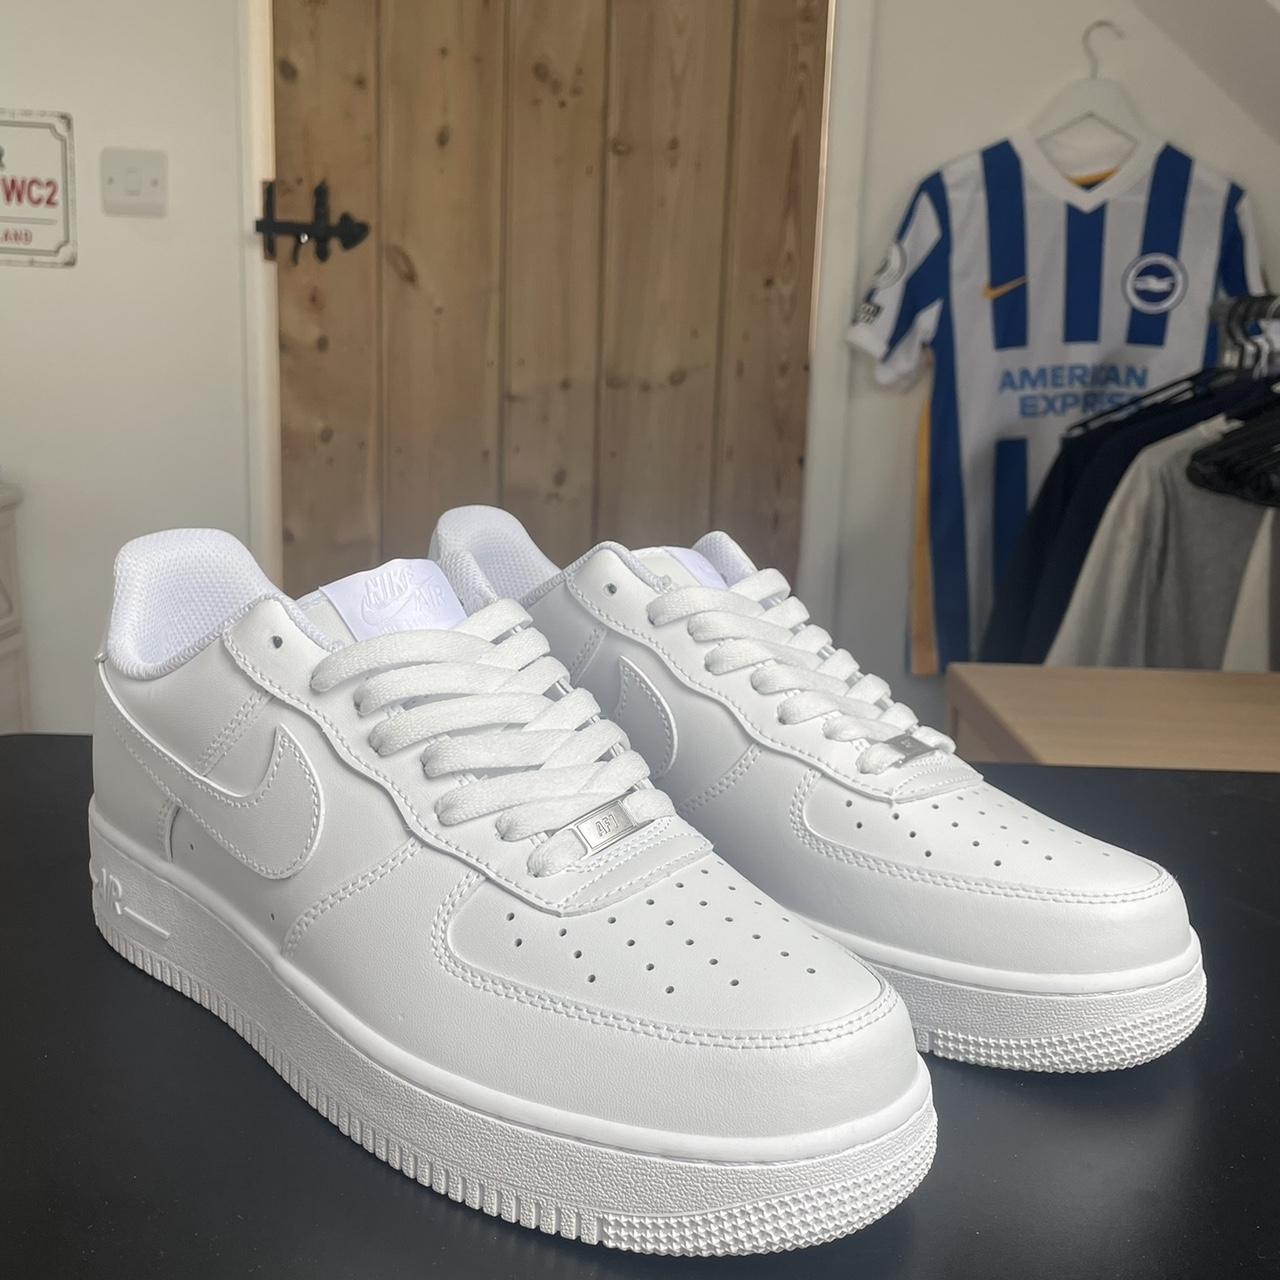 Brand new air force 1 size 9. Selling onwards as... - Depop